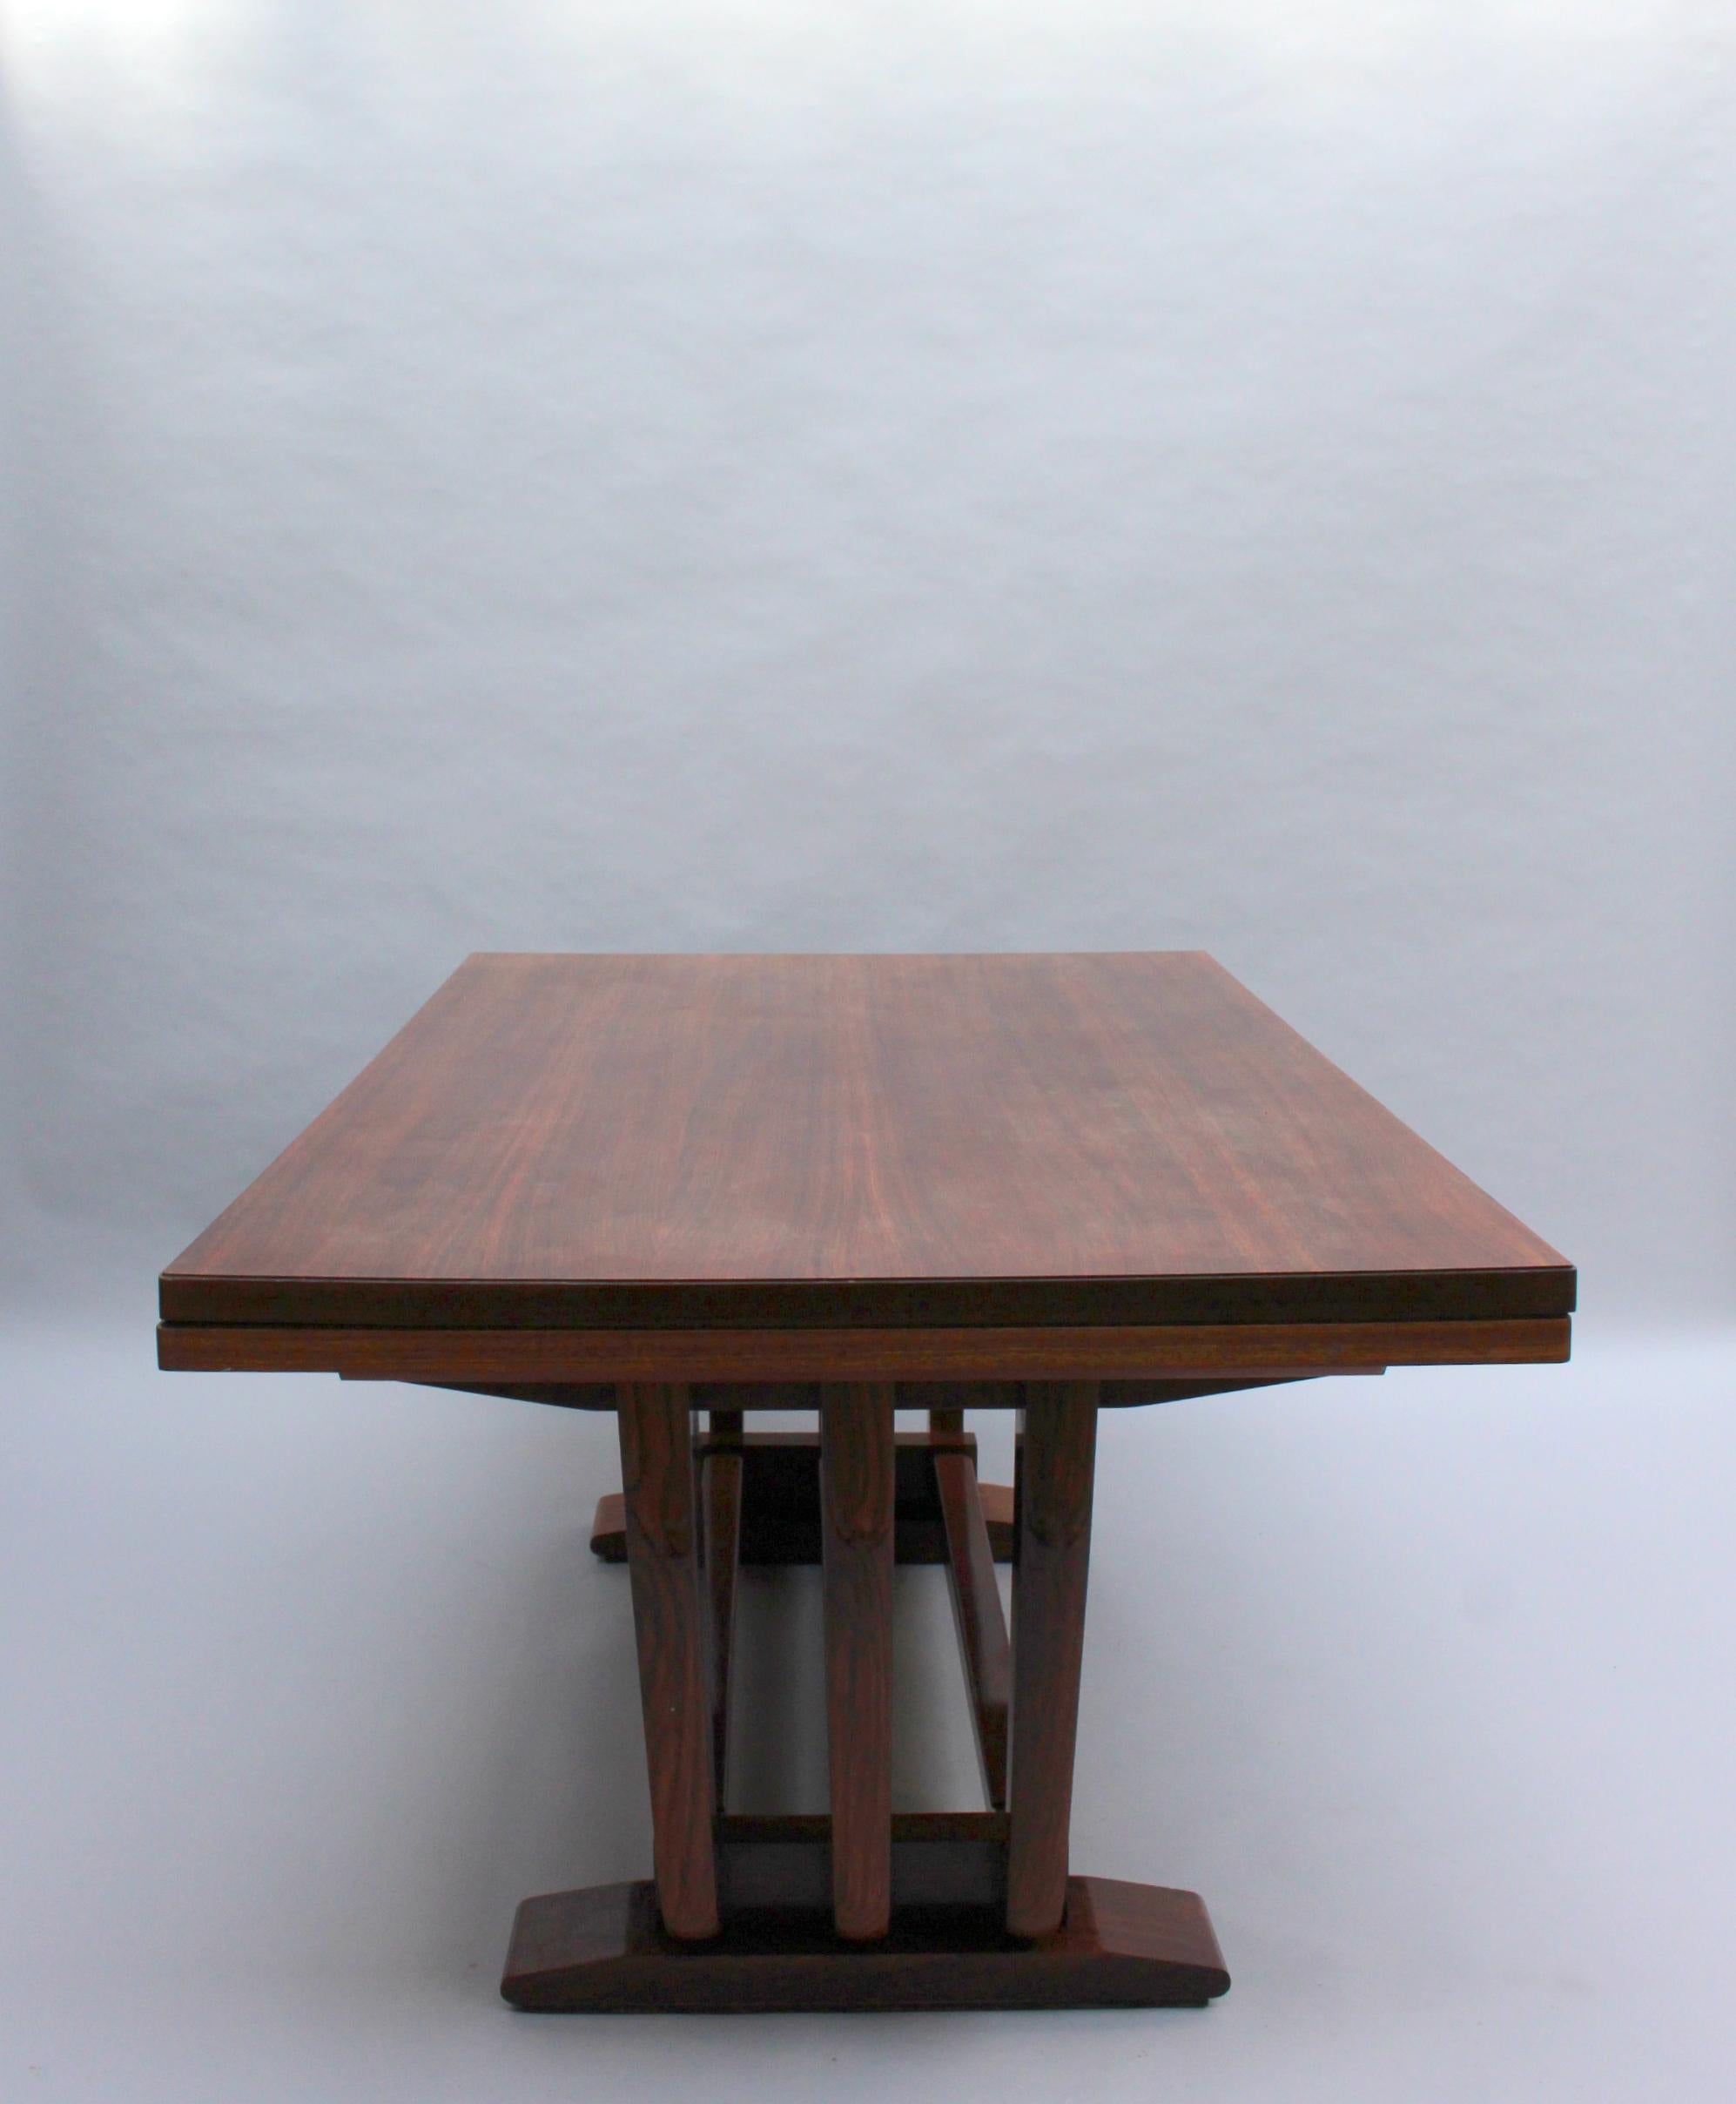 A fine French Art Deco rosewood dining / writing table by Maxime Old.
Leaves are not usable.
Signed.